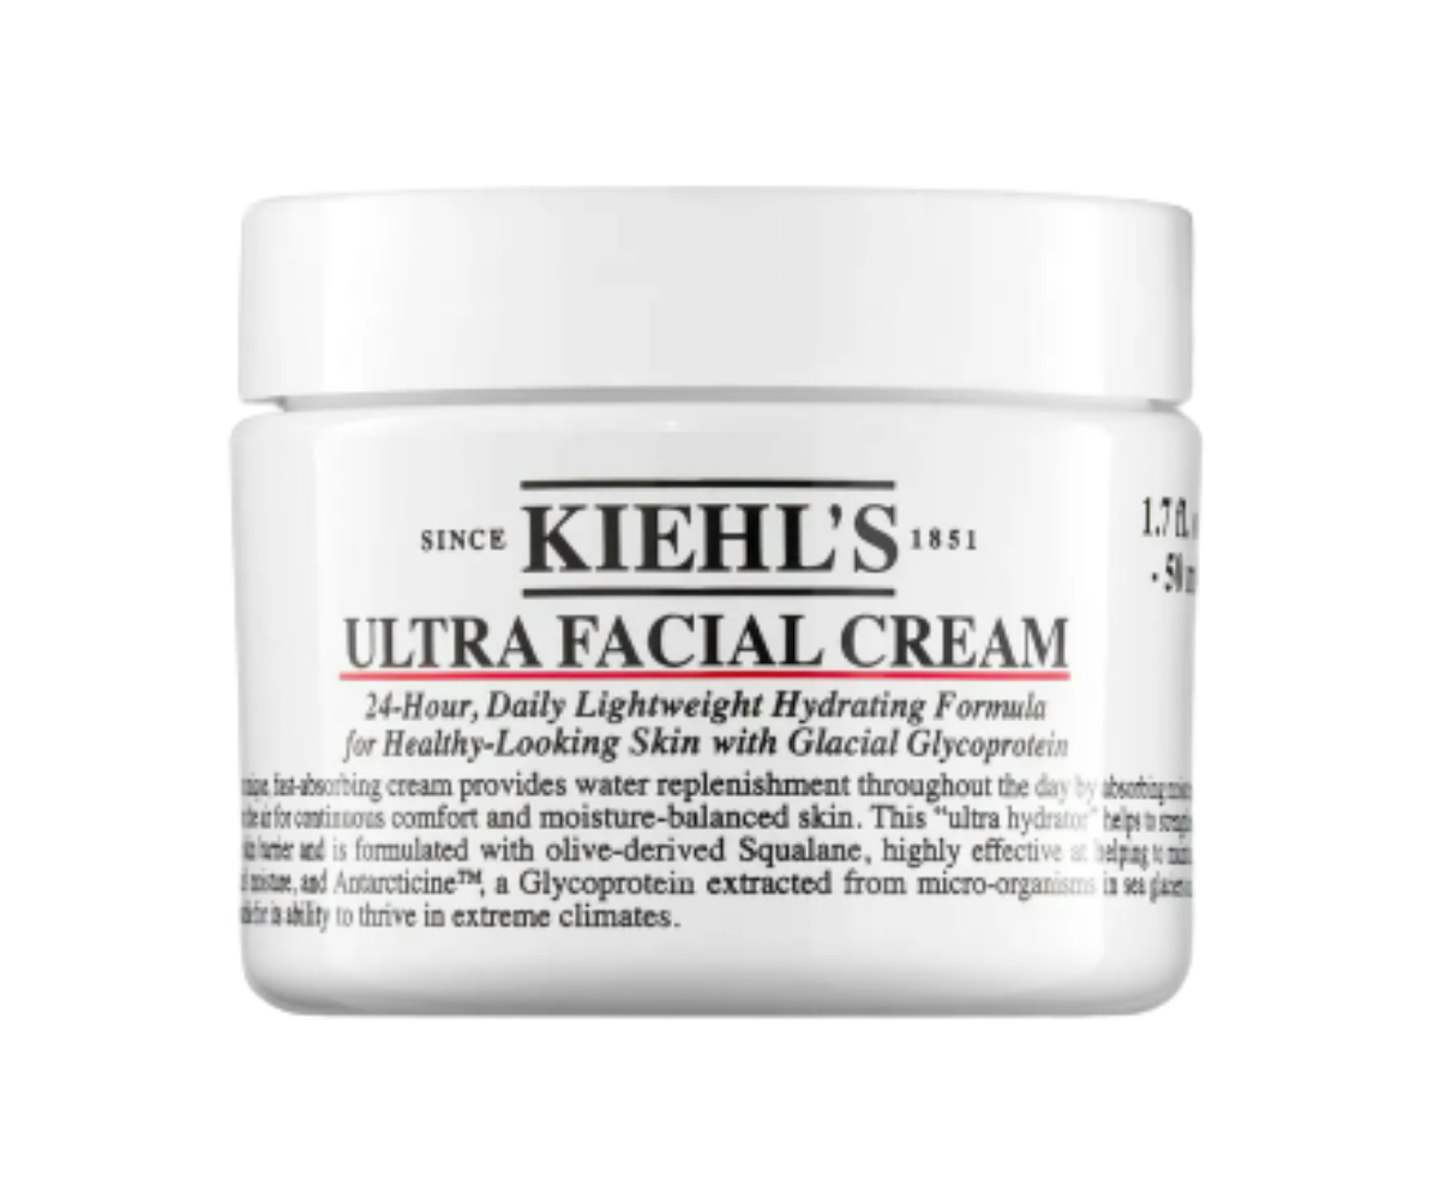 The Magic Cream That Everyone's Talking About